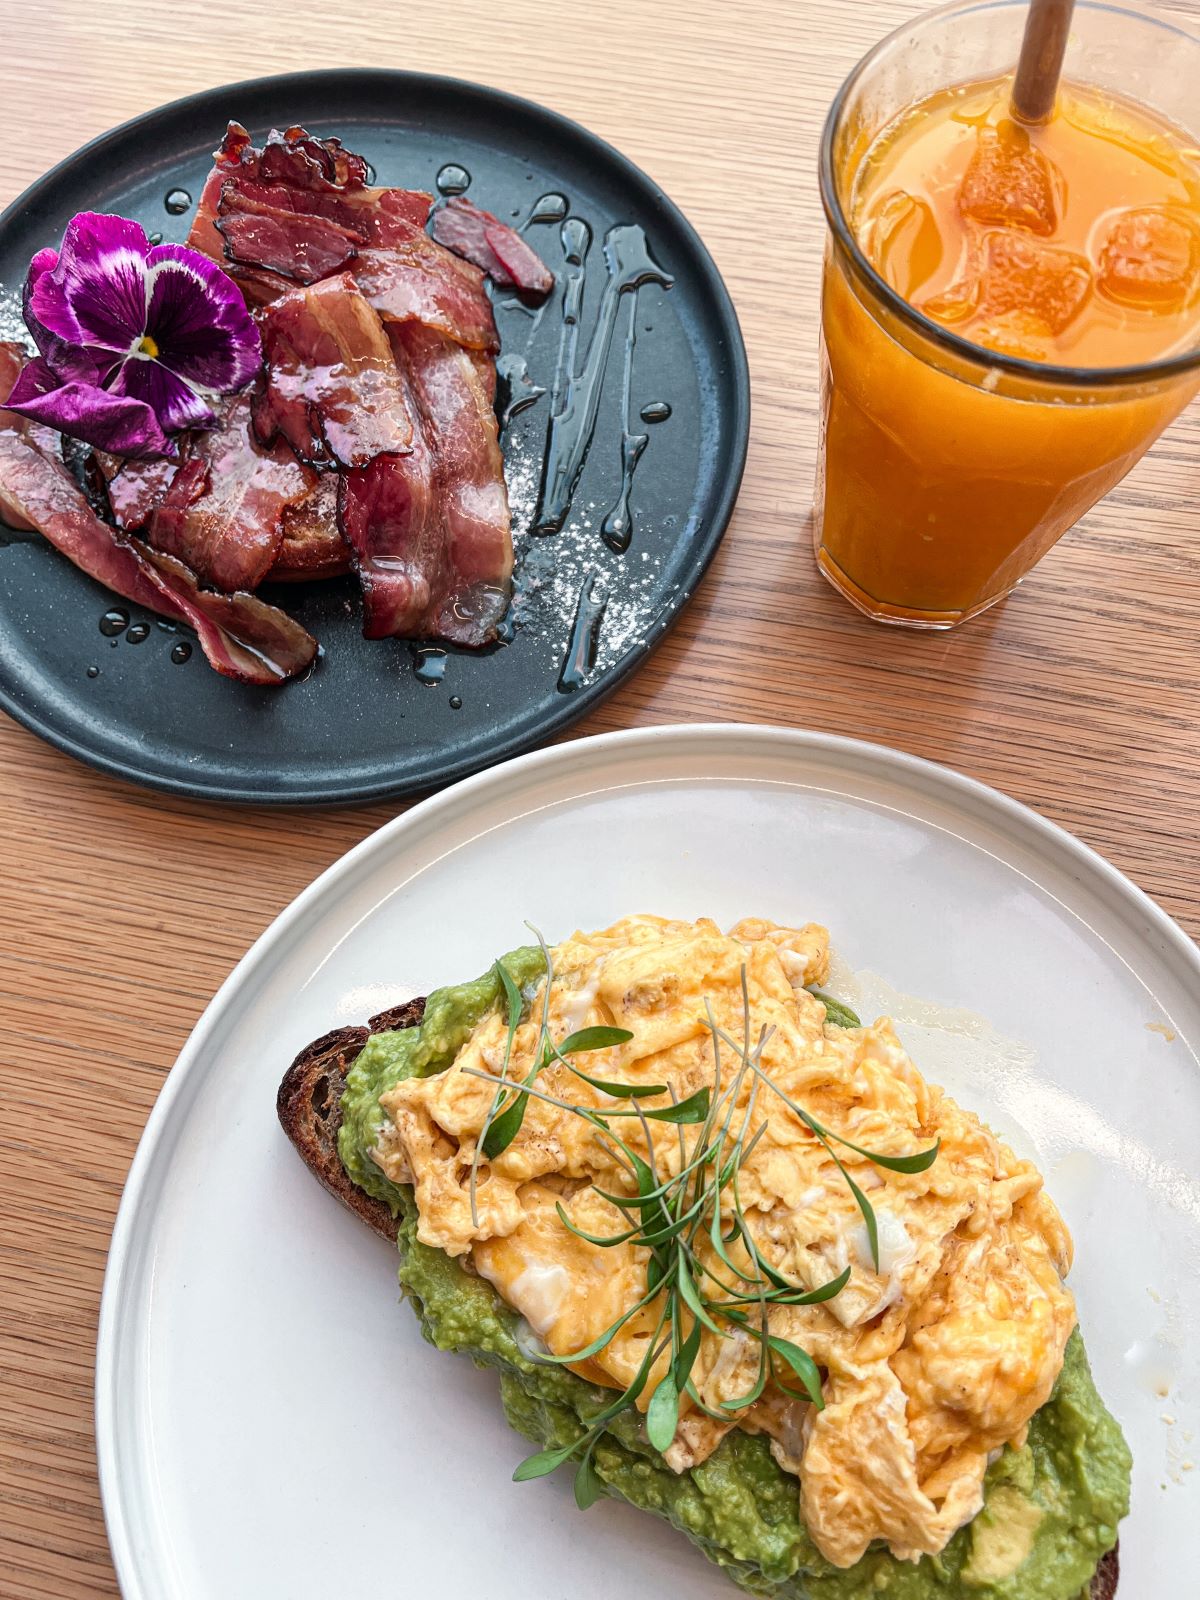 toast with avocado and scrambled eggs, bacon and orange juice